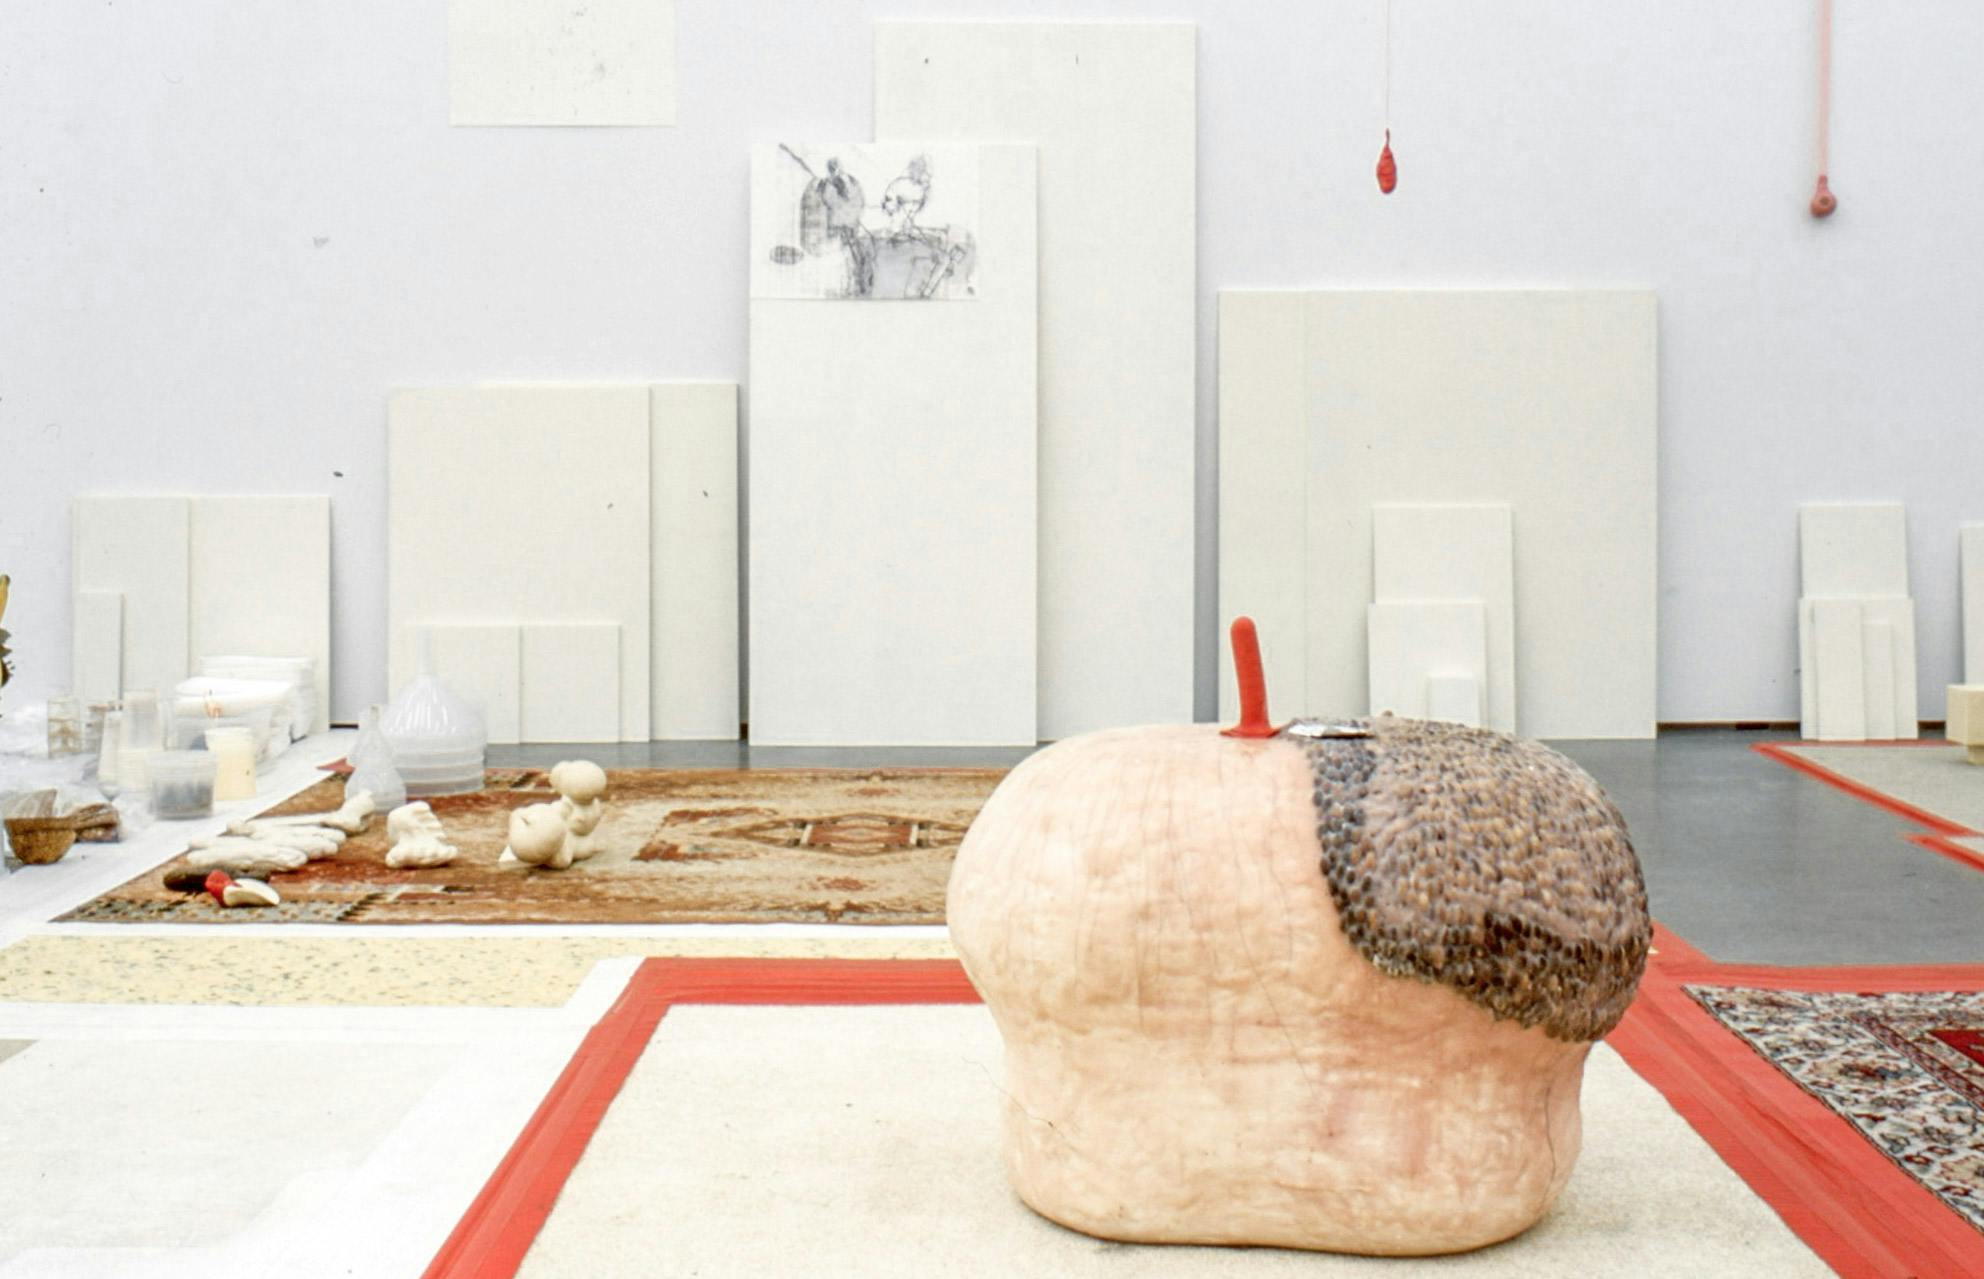 Installation image of artworks in a gallery. A variety of found objects, including shellfish and a toy shovel are placed on a partially carpeted floor. Various sized white planks lean against the far wall.